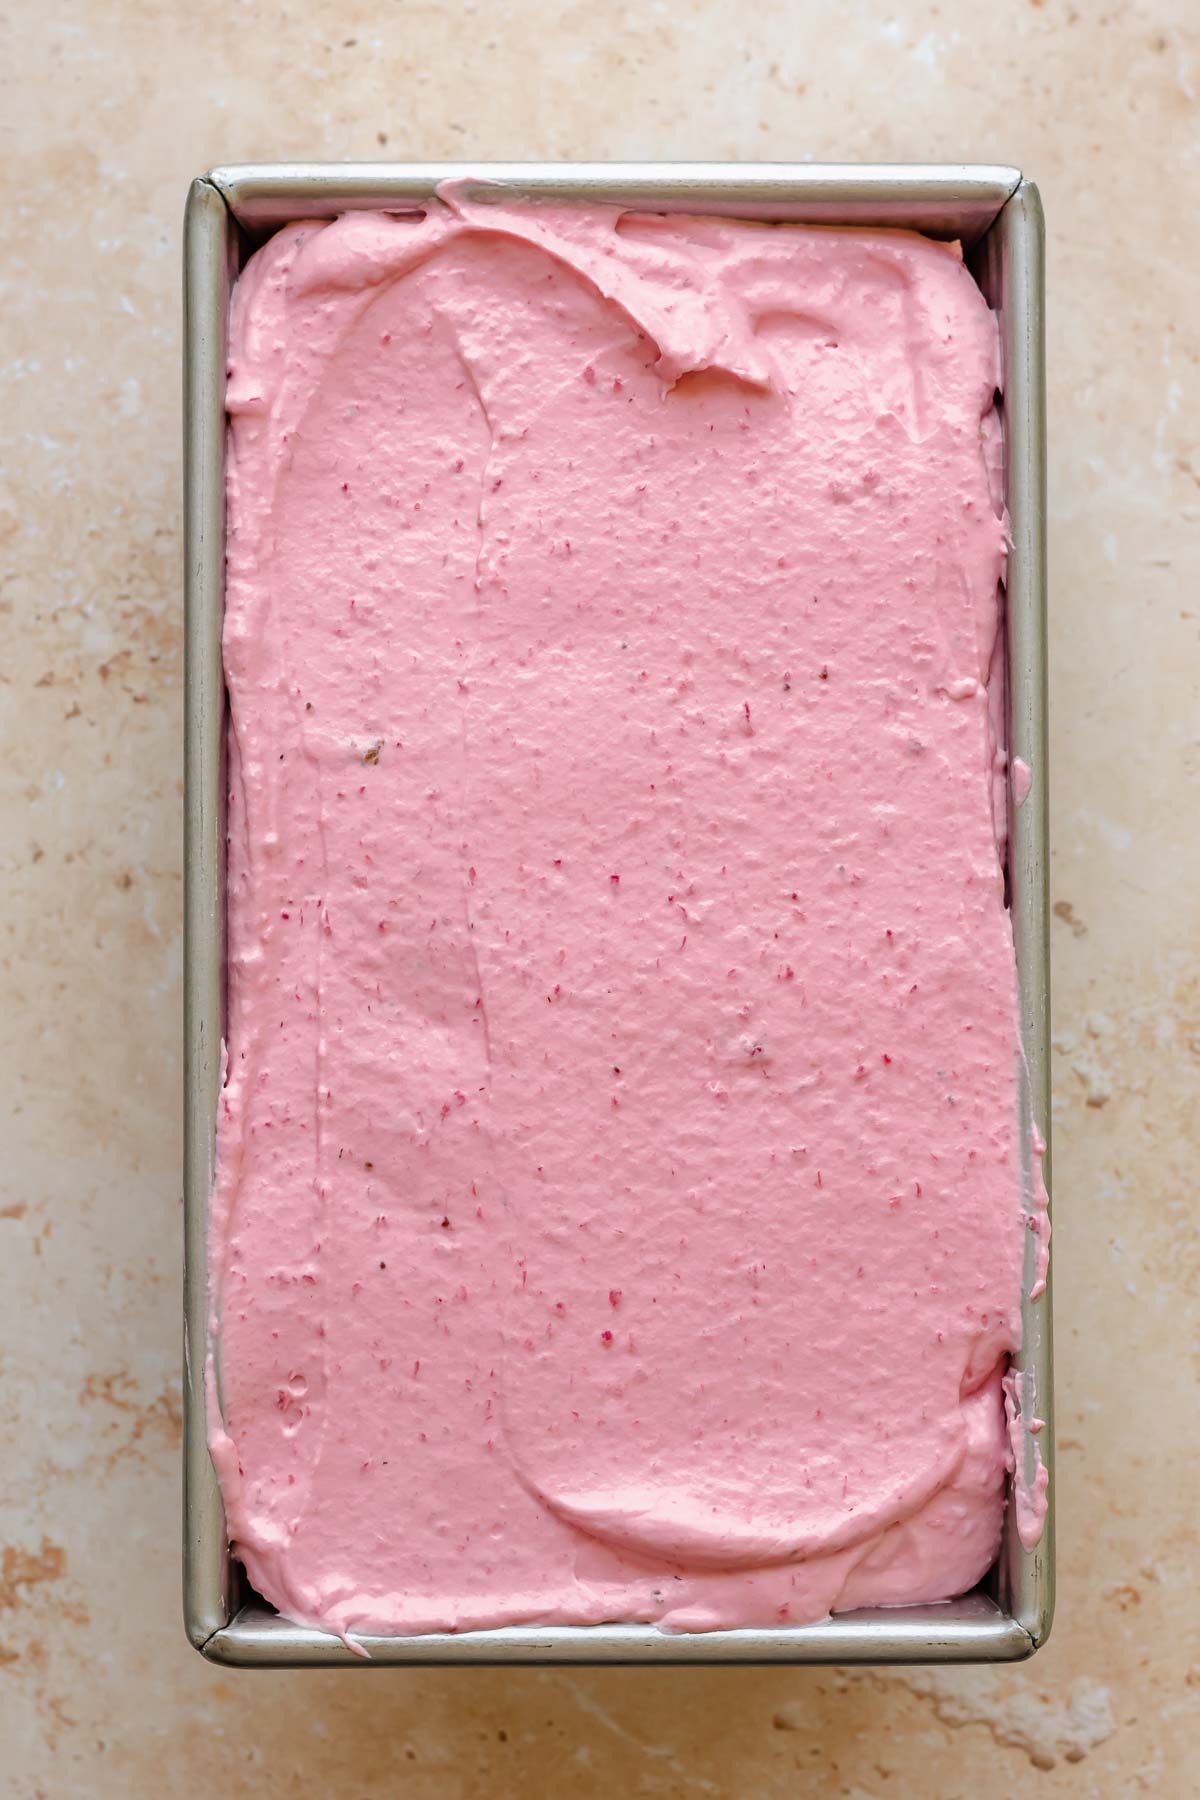 Strawberry ice cream filling a metal loaf pan.